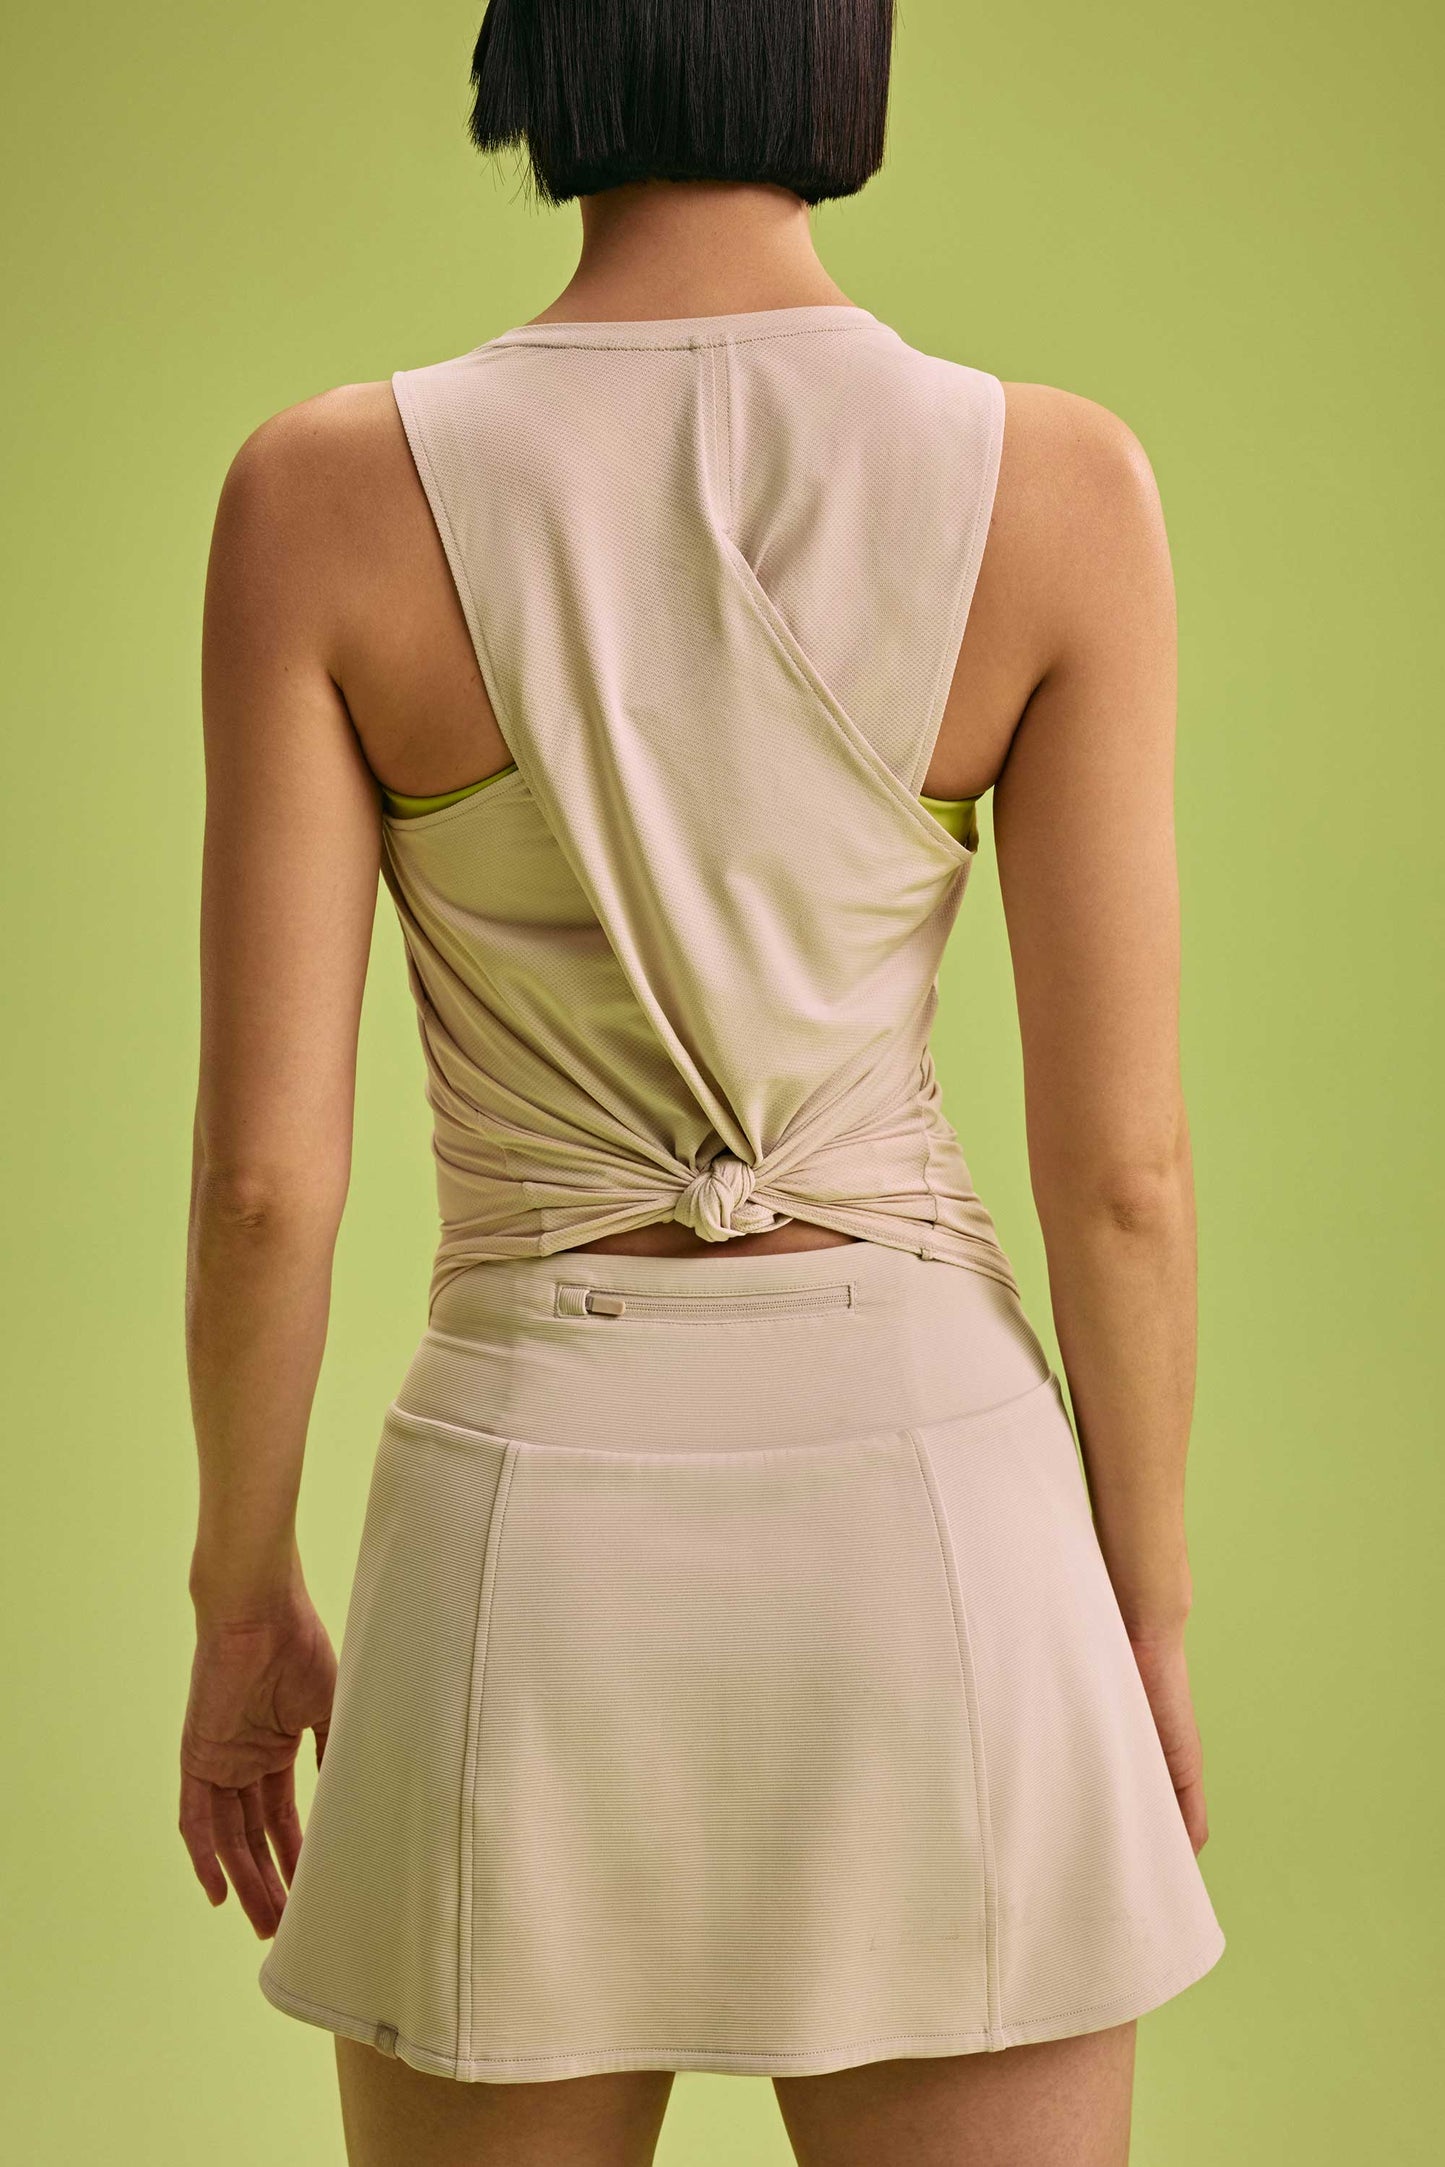 back of a woman wearing cross back tank and cream skirt 